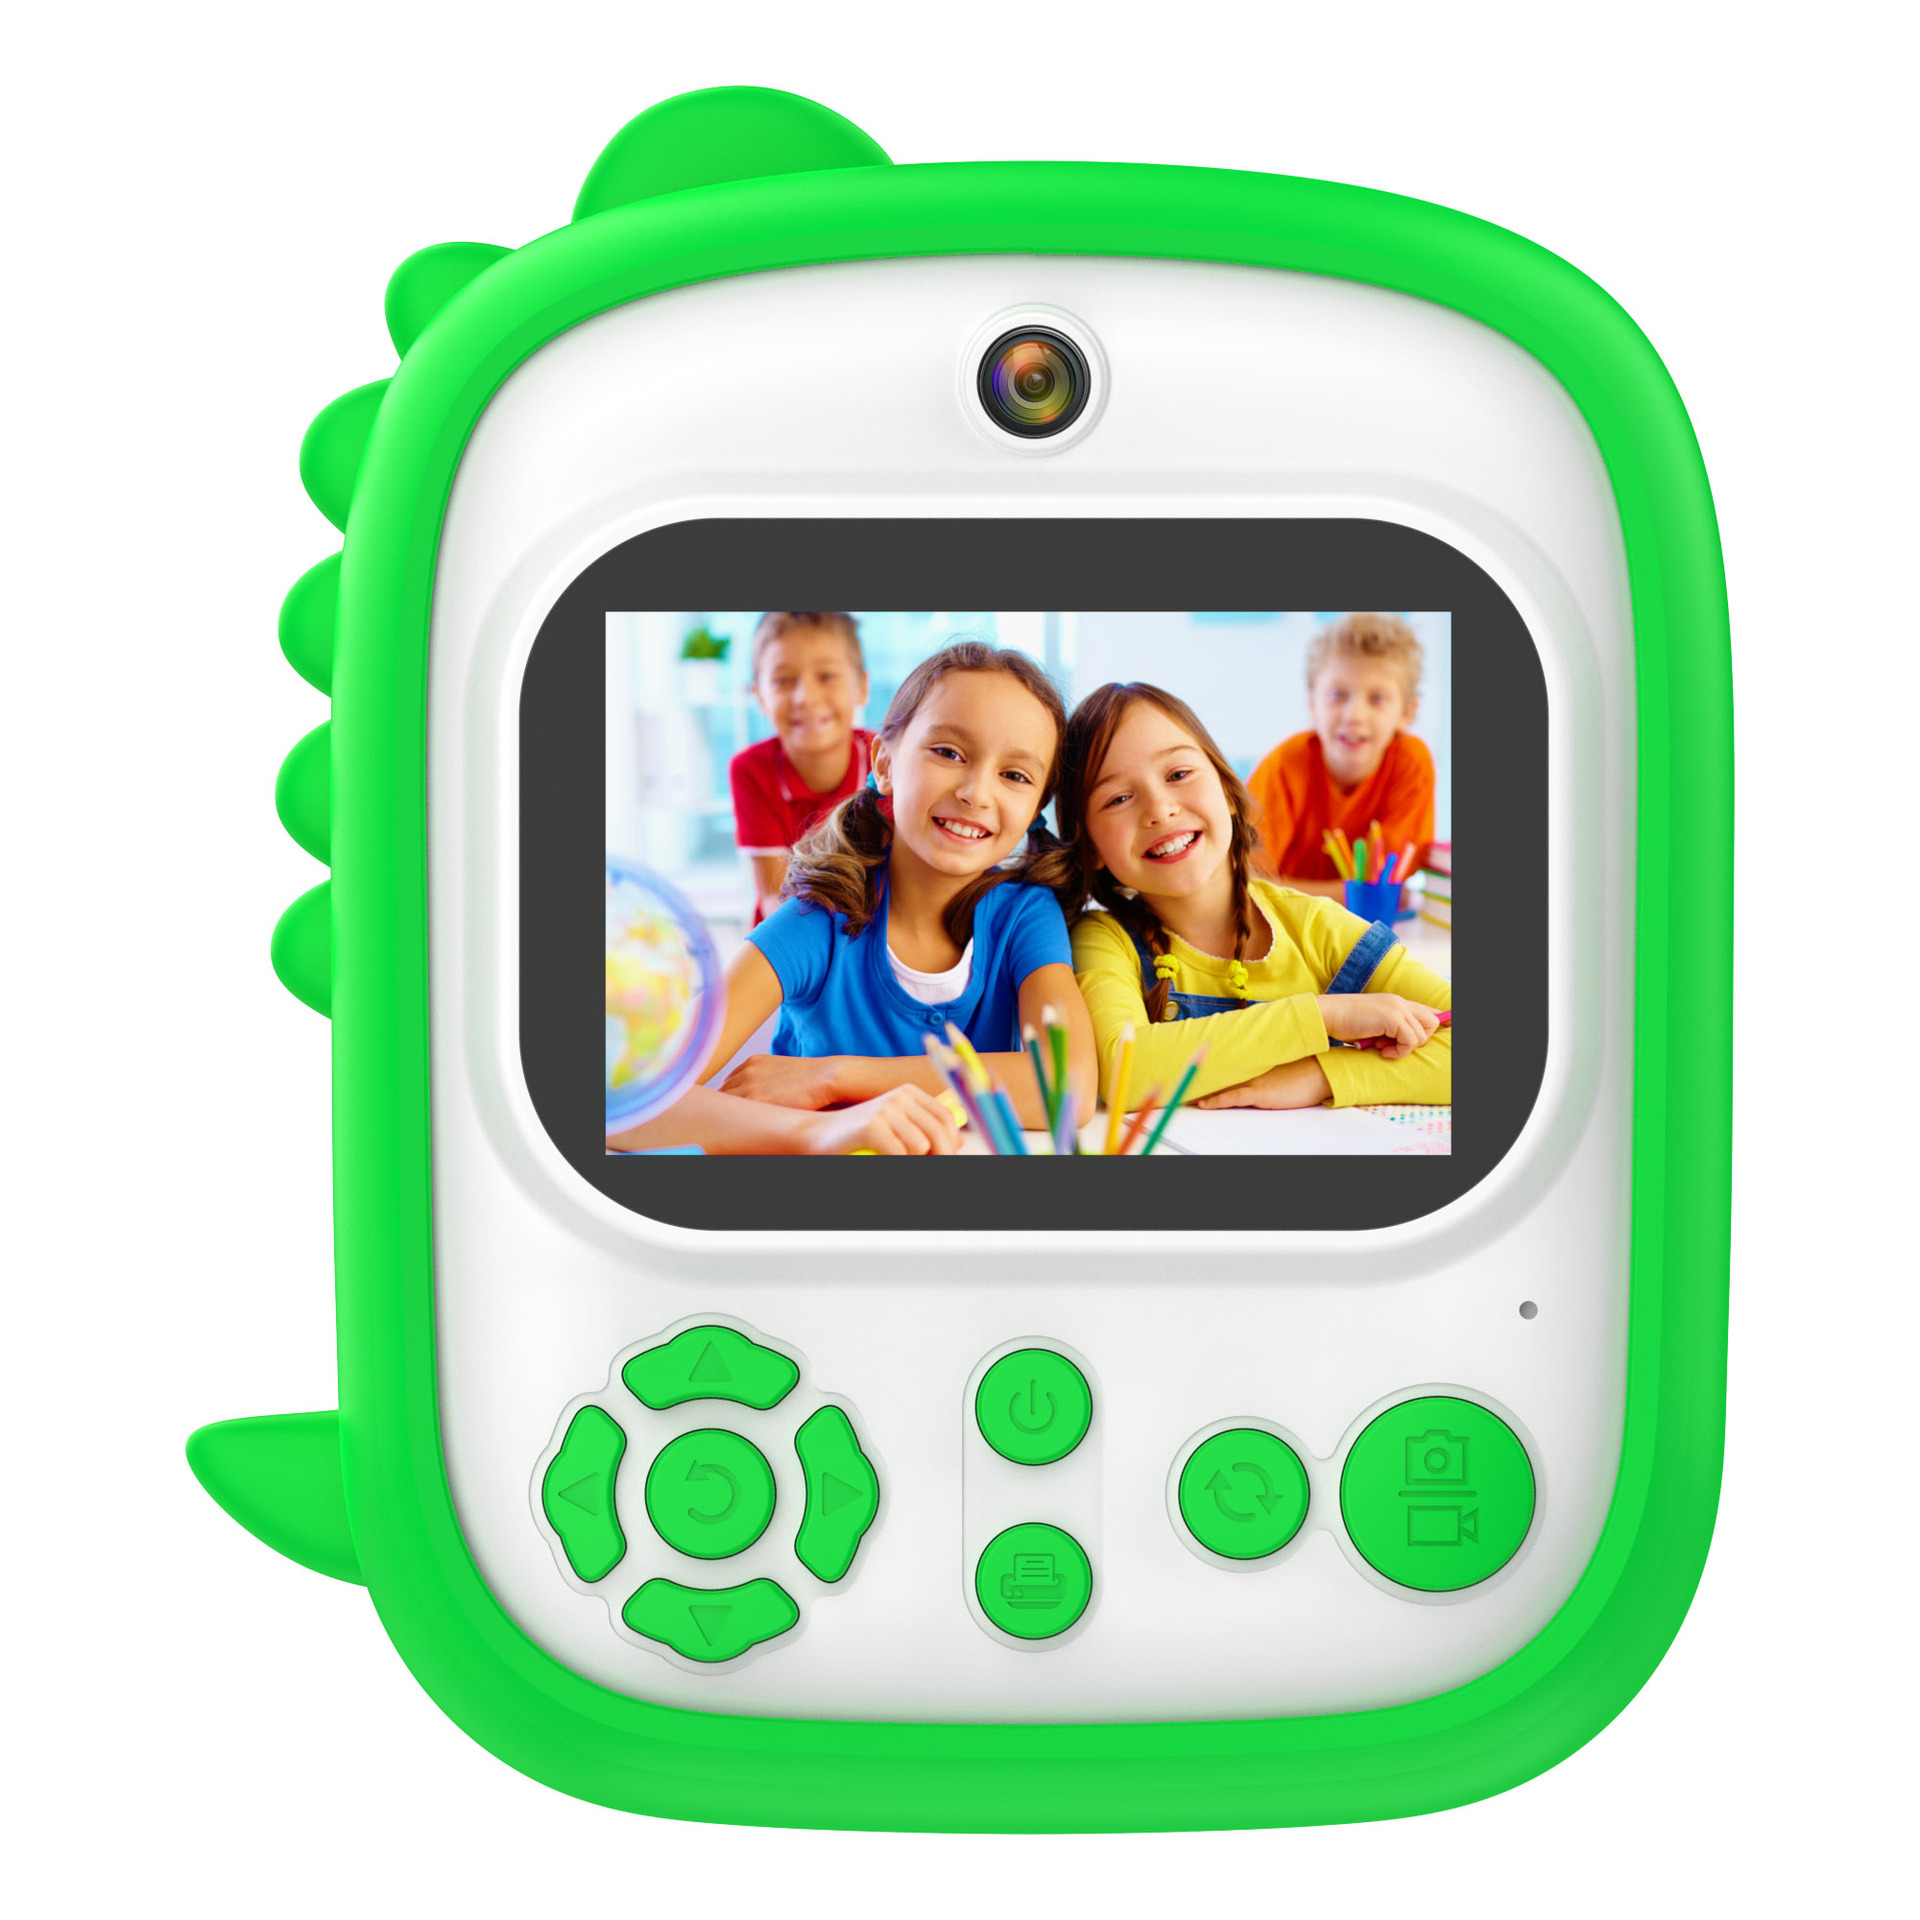 New Arrival Dinosaur Silicone Protective Cover 1080P Digital Selfie Camera 2.4-inch IPS screen Instant Print Kids Camera